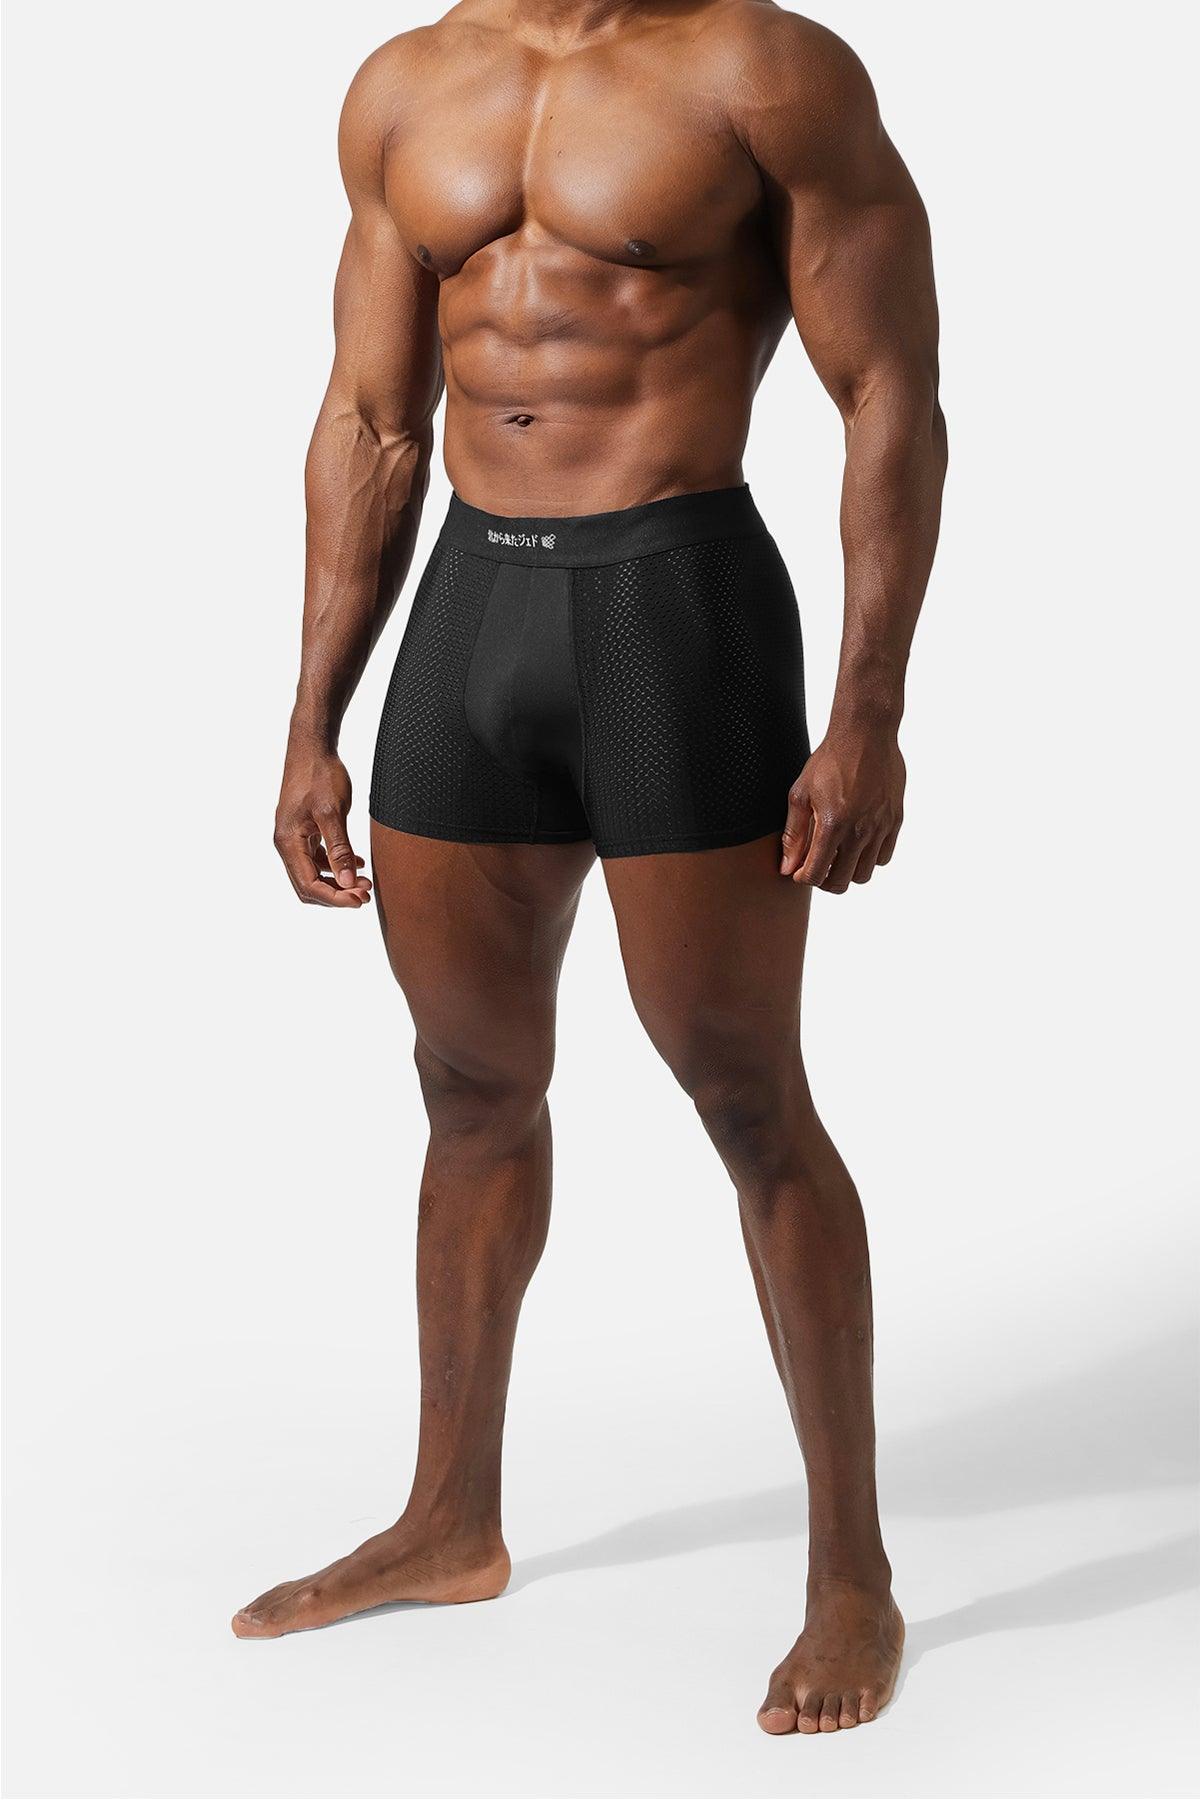 Men's Workout Mesh Boxer Briefs 2 Pack - Black and Gray - Jed North